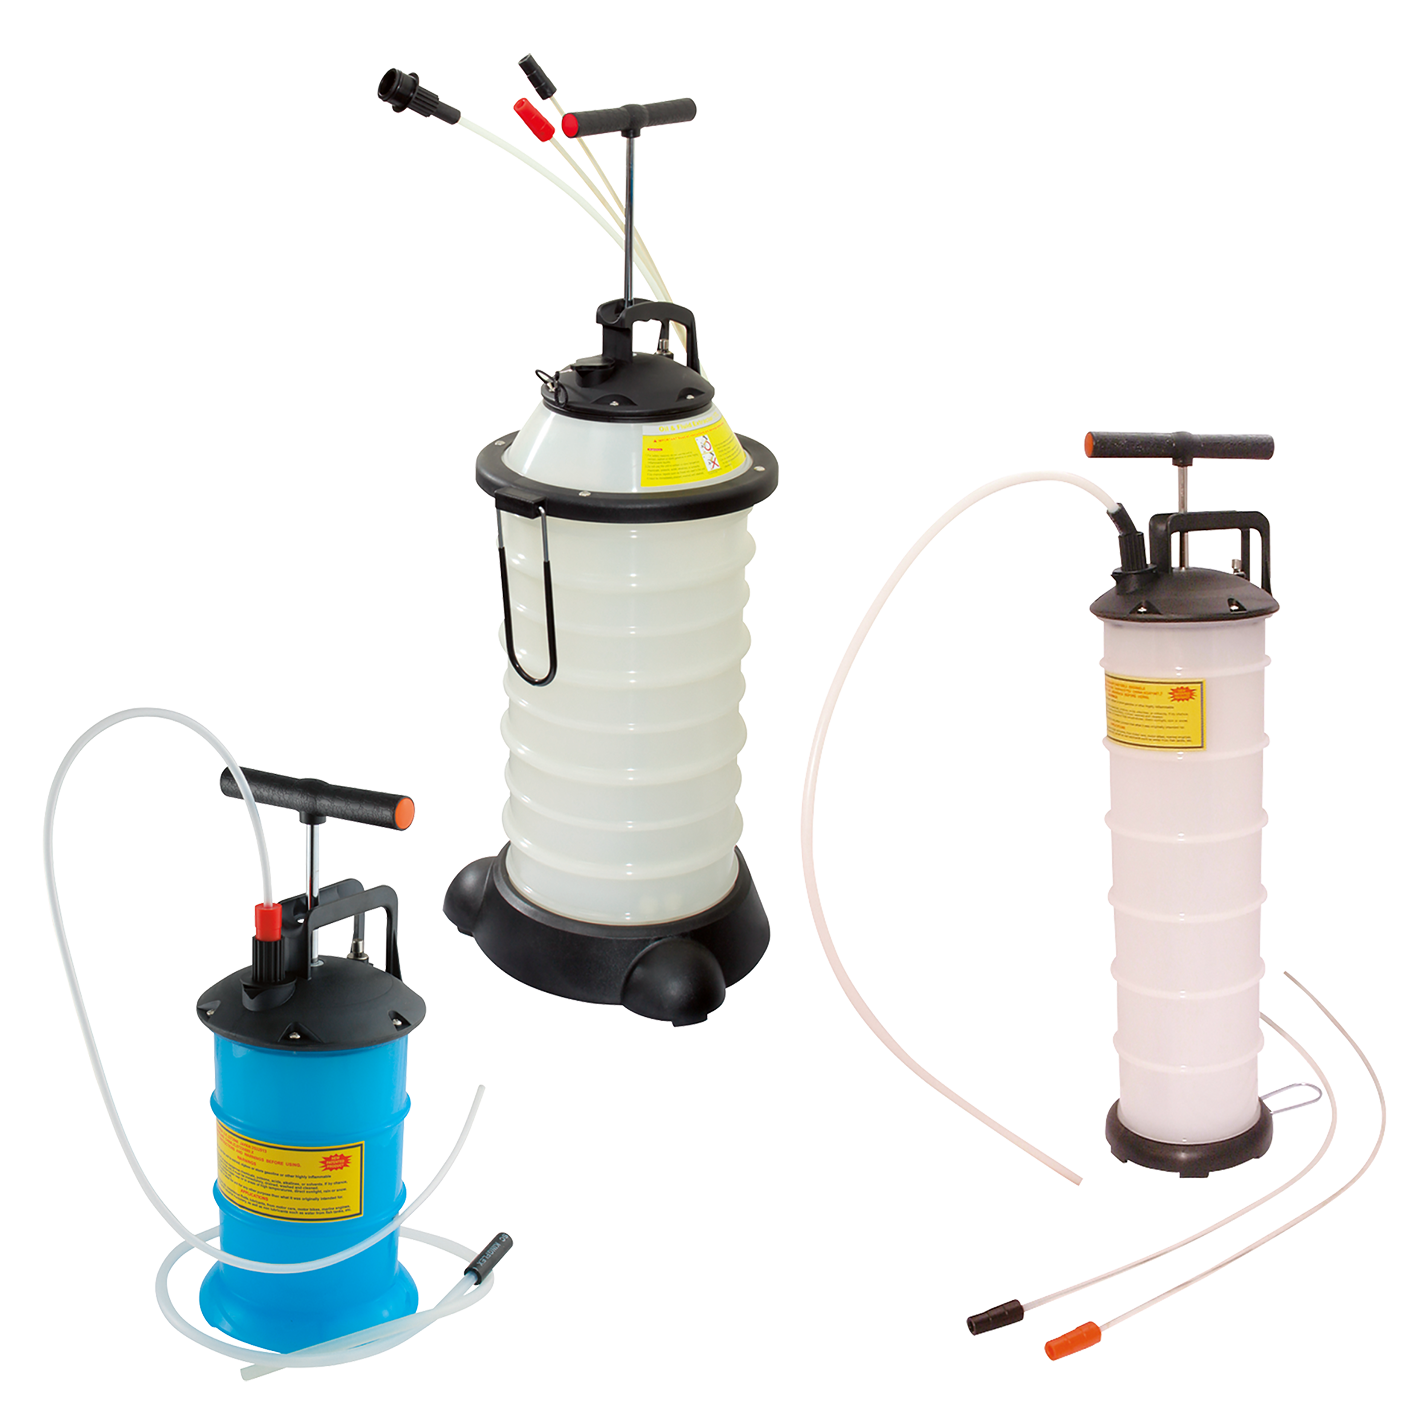 17 LTR SUCTION/EXTRACTION/ UNIT